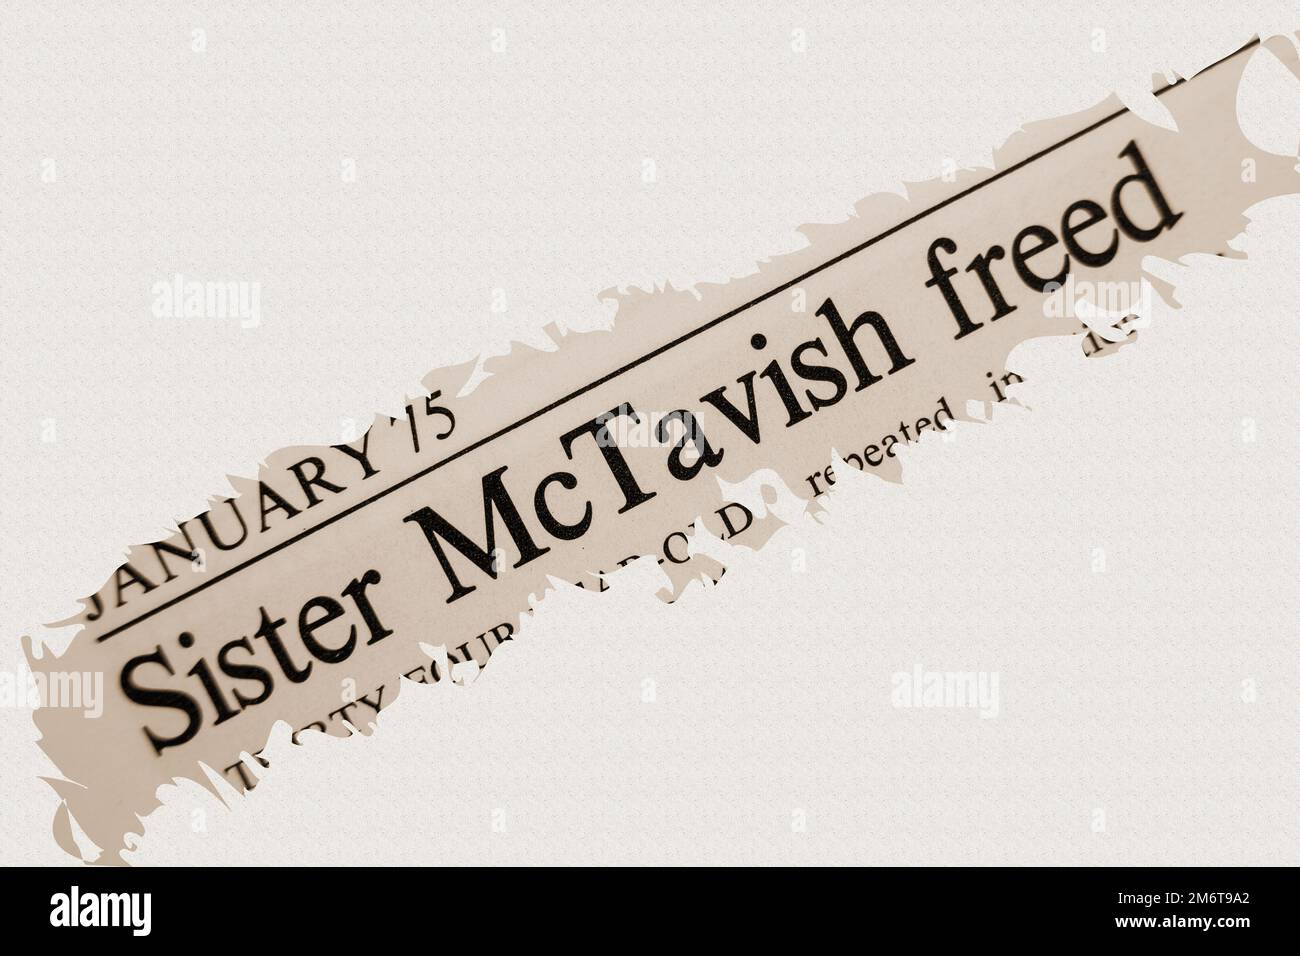 news story from 1975 newspaper headline article title - Sister McTavish freed - overlay sepia Stock Photo